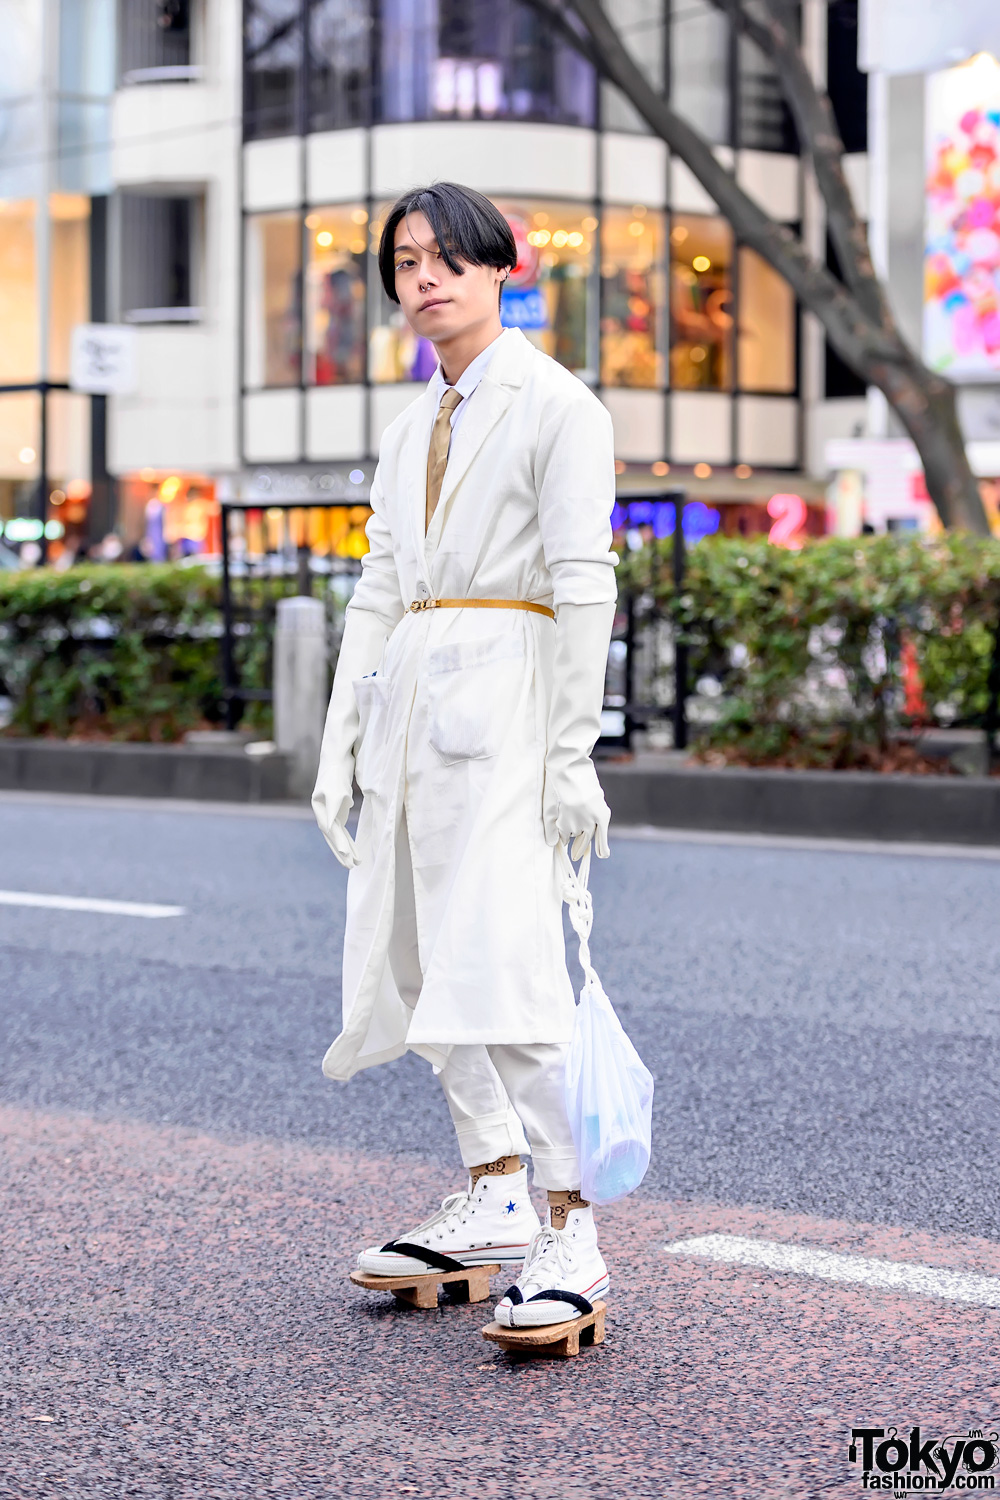 Japanese Sandals x Converse Chuck All Stars & White Gloves Style in Harajuku – Tokyo